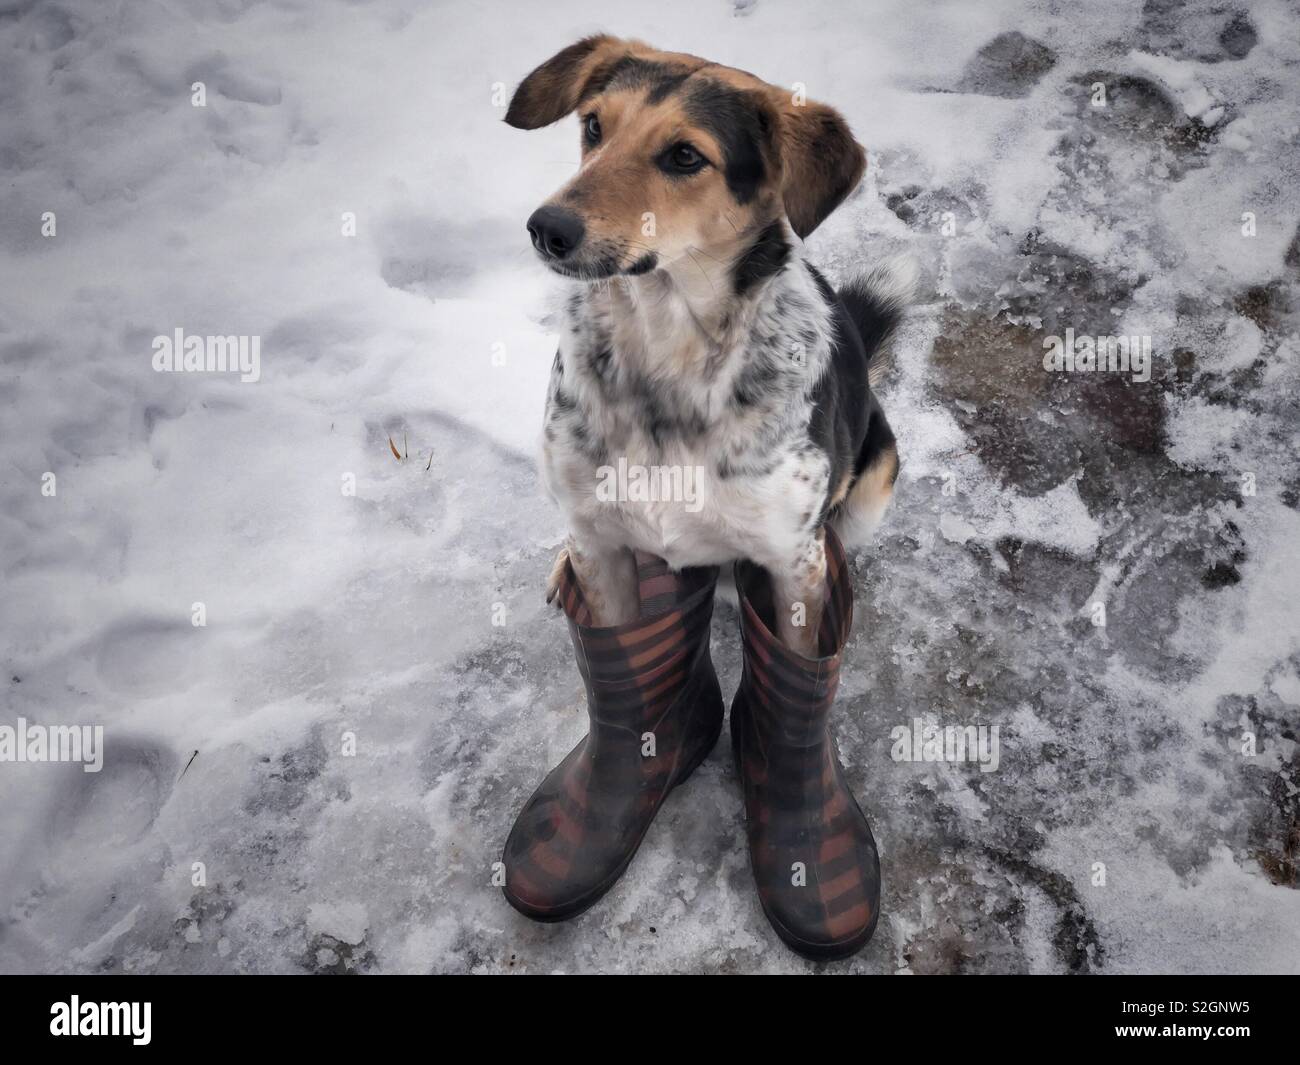 Mixed breed hunting dog sitting on a wet snow wearing human wellingtons Stock Photo